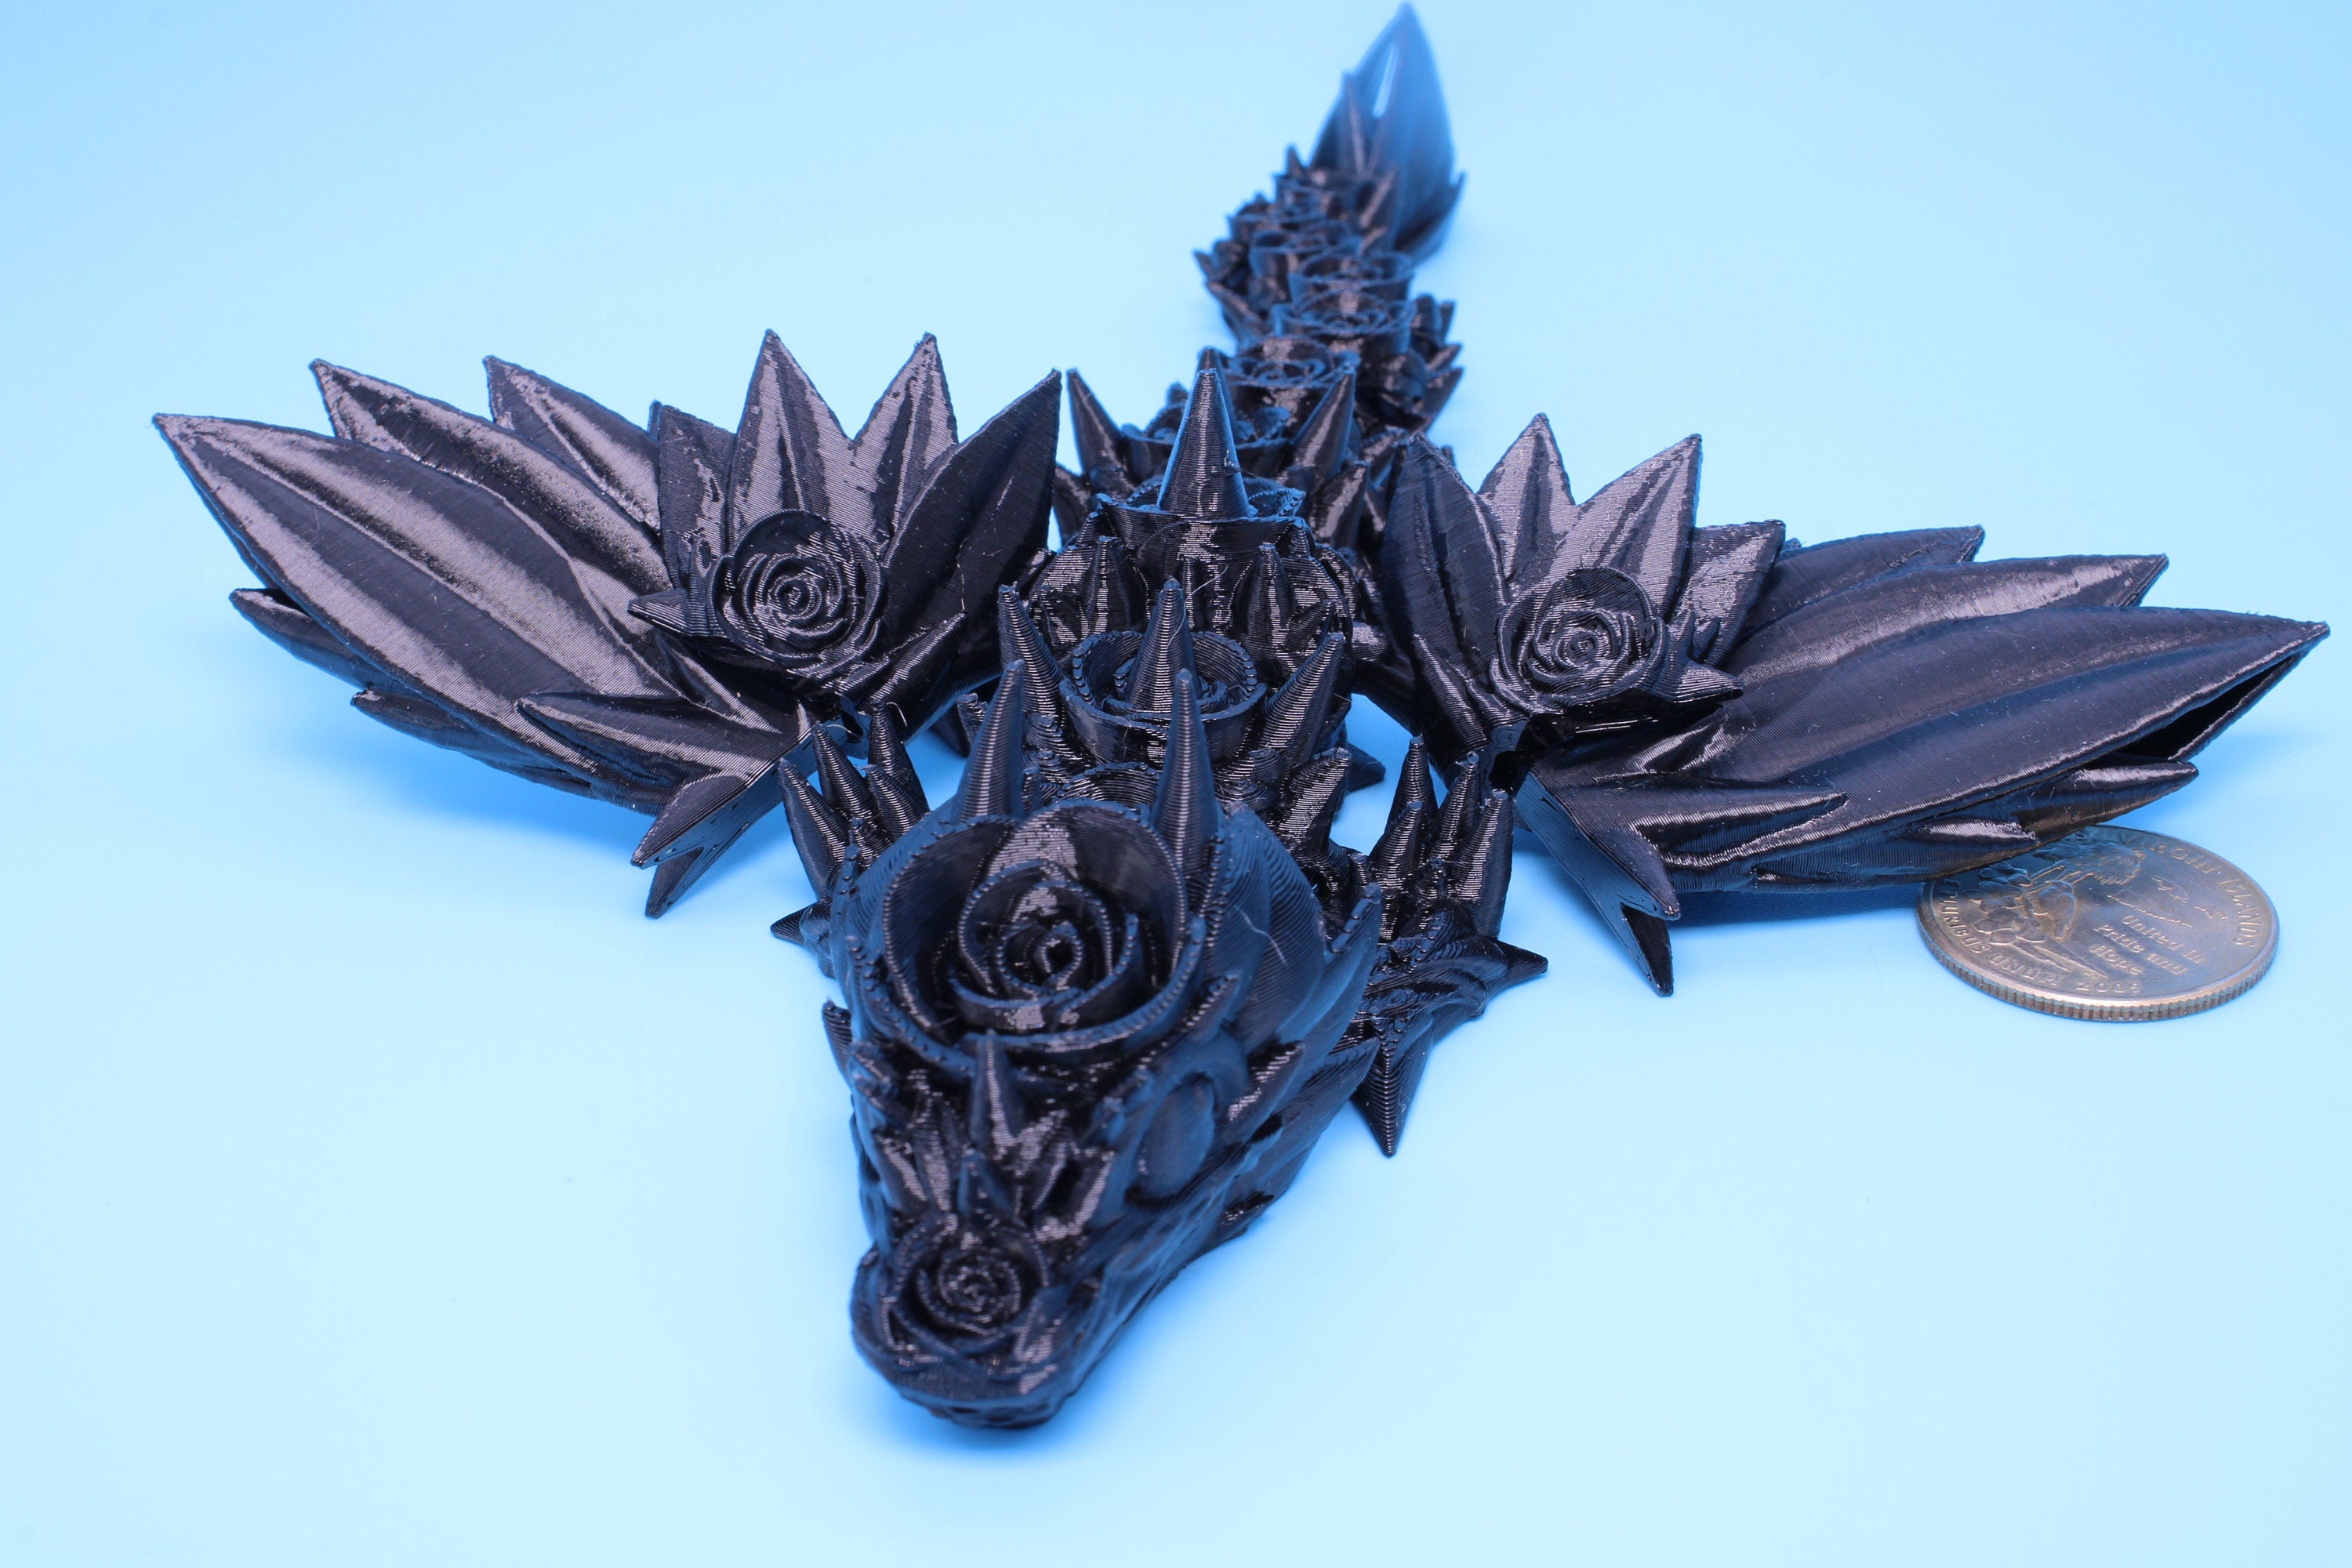 Baby Rose Wing Dragon | Black | 3D Printed | Fidget | Flexi Toy 8.5 in. | Stress Relief Gift